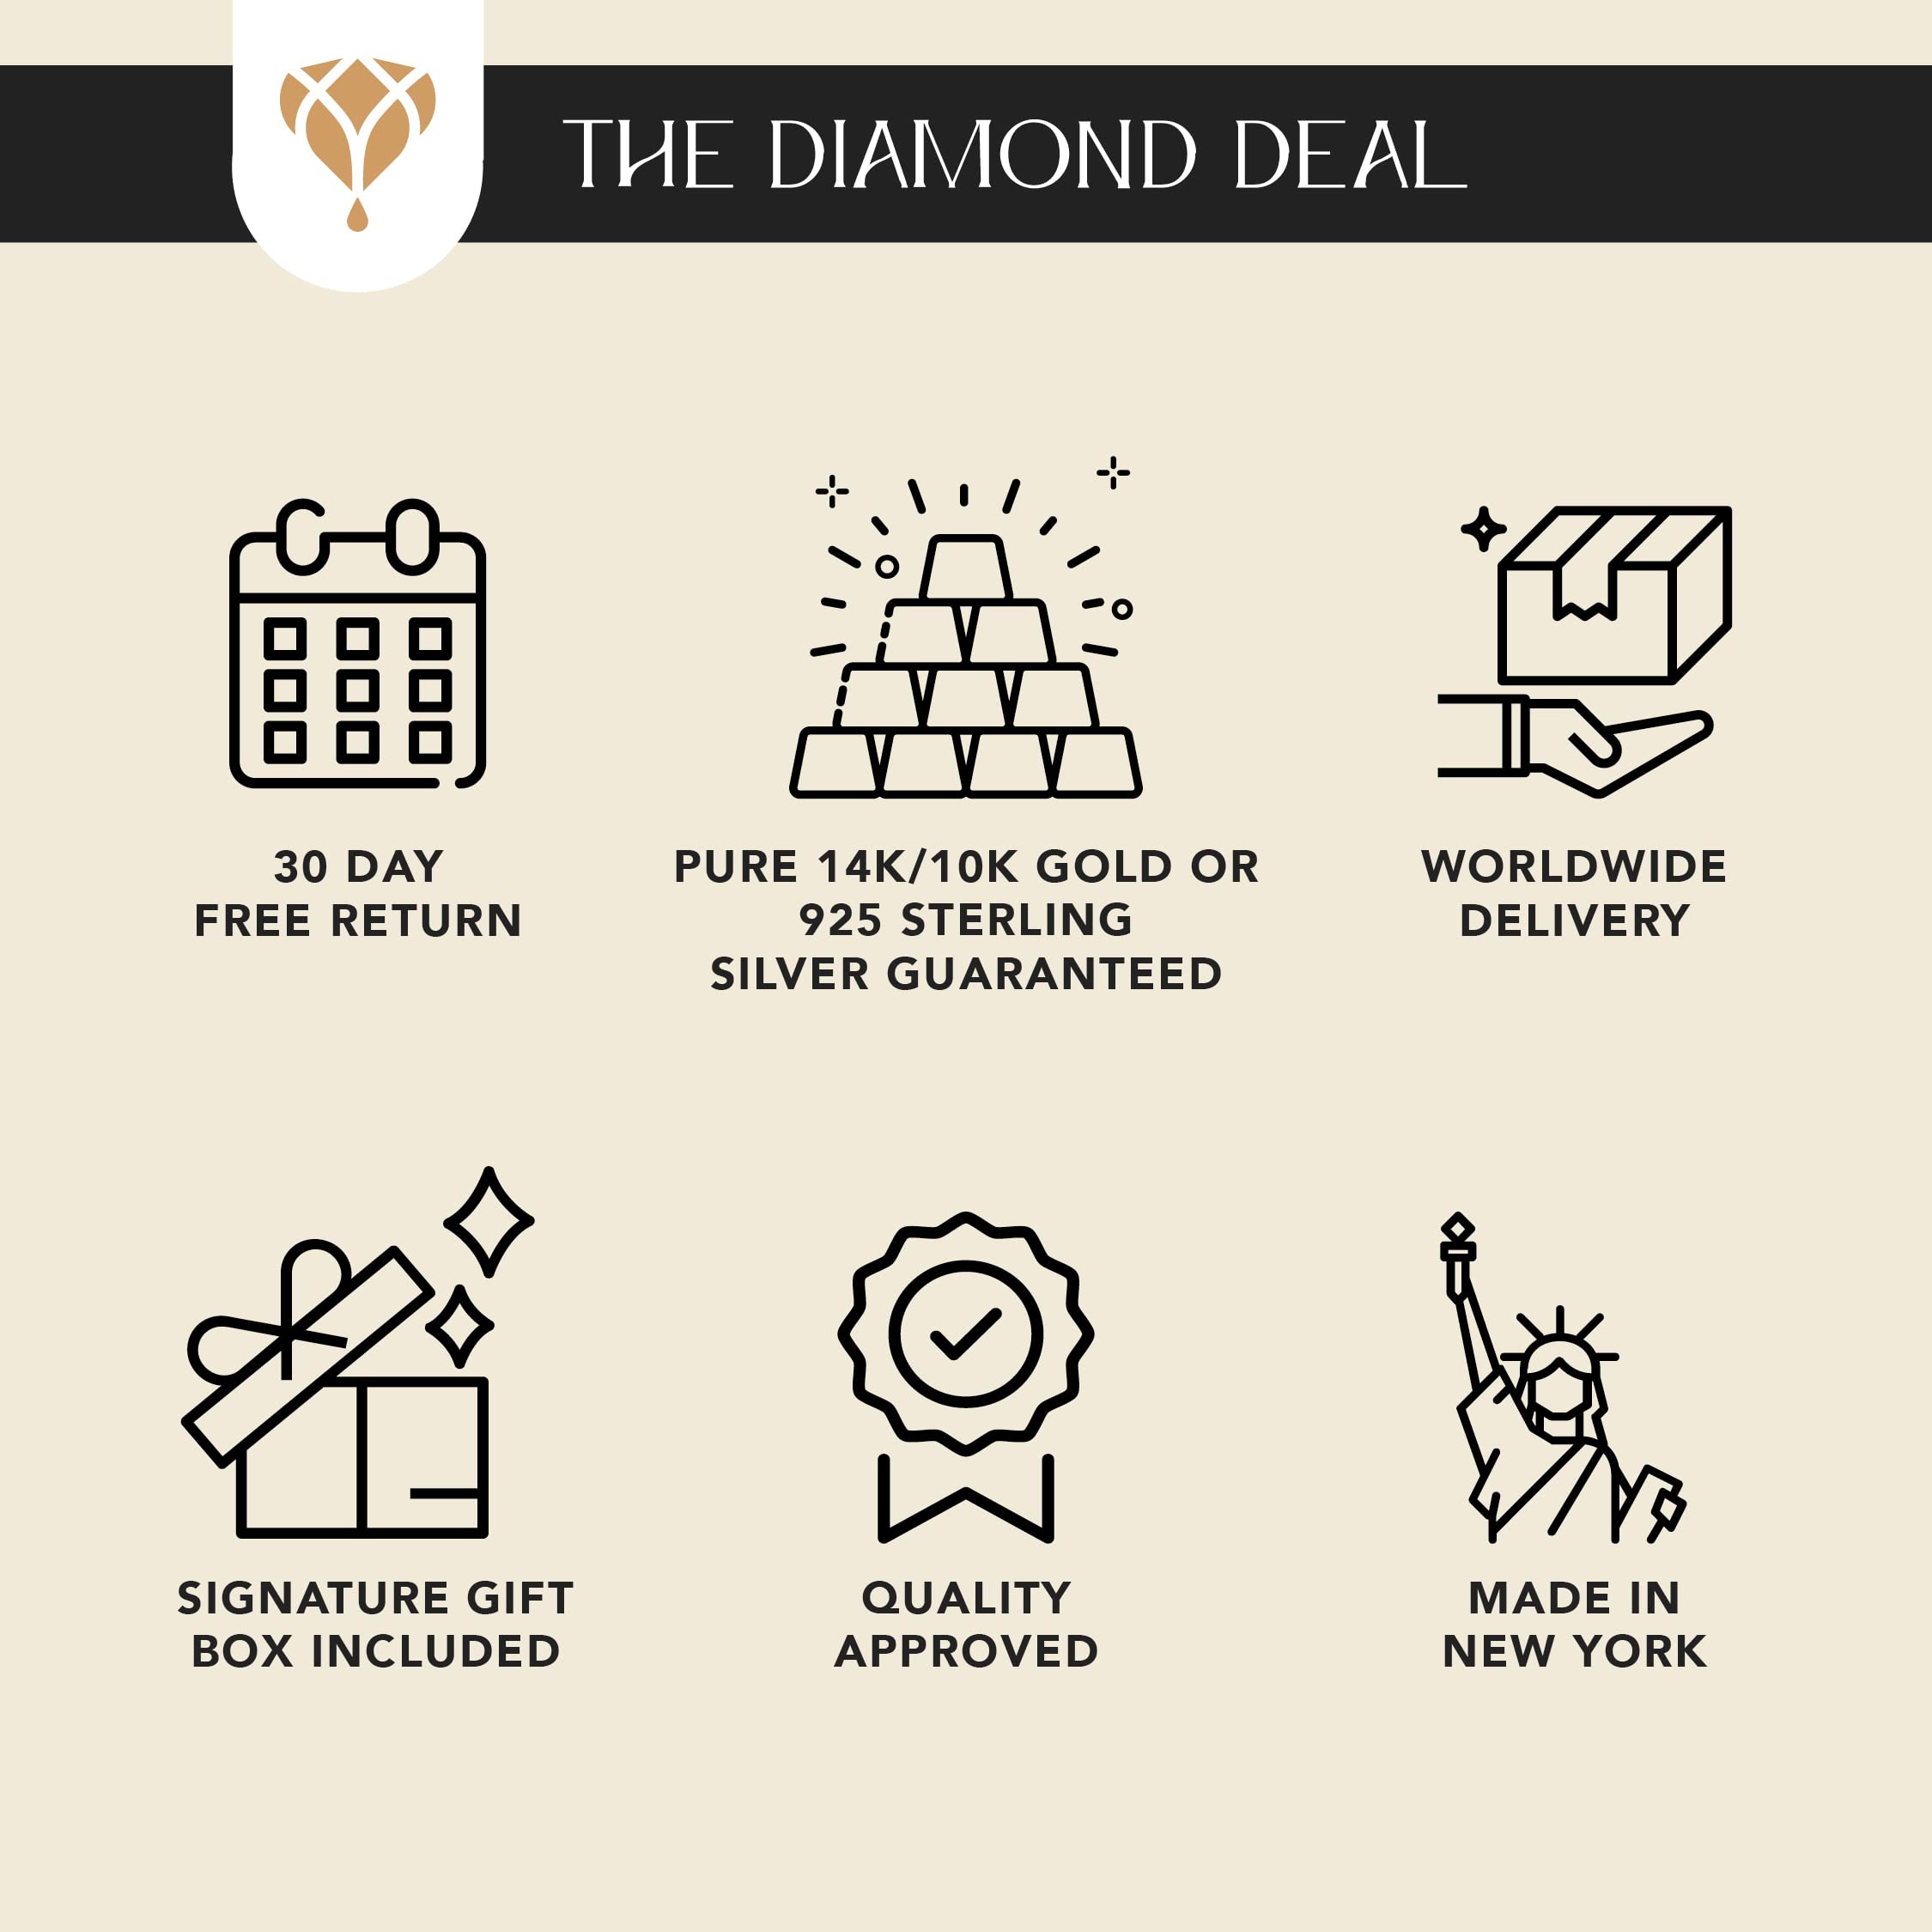 The Diamond Deal .25-1.00 Carat Round Shape Brilliant Solitaire Lab-Grown Diamond Solitaire Pendant Necklace For Women Girls infants | 14k Yellow or White or Rose/Pink Gold With 18